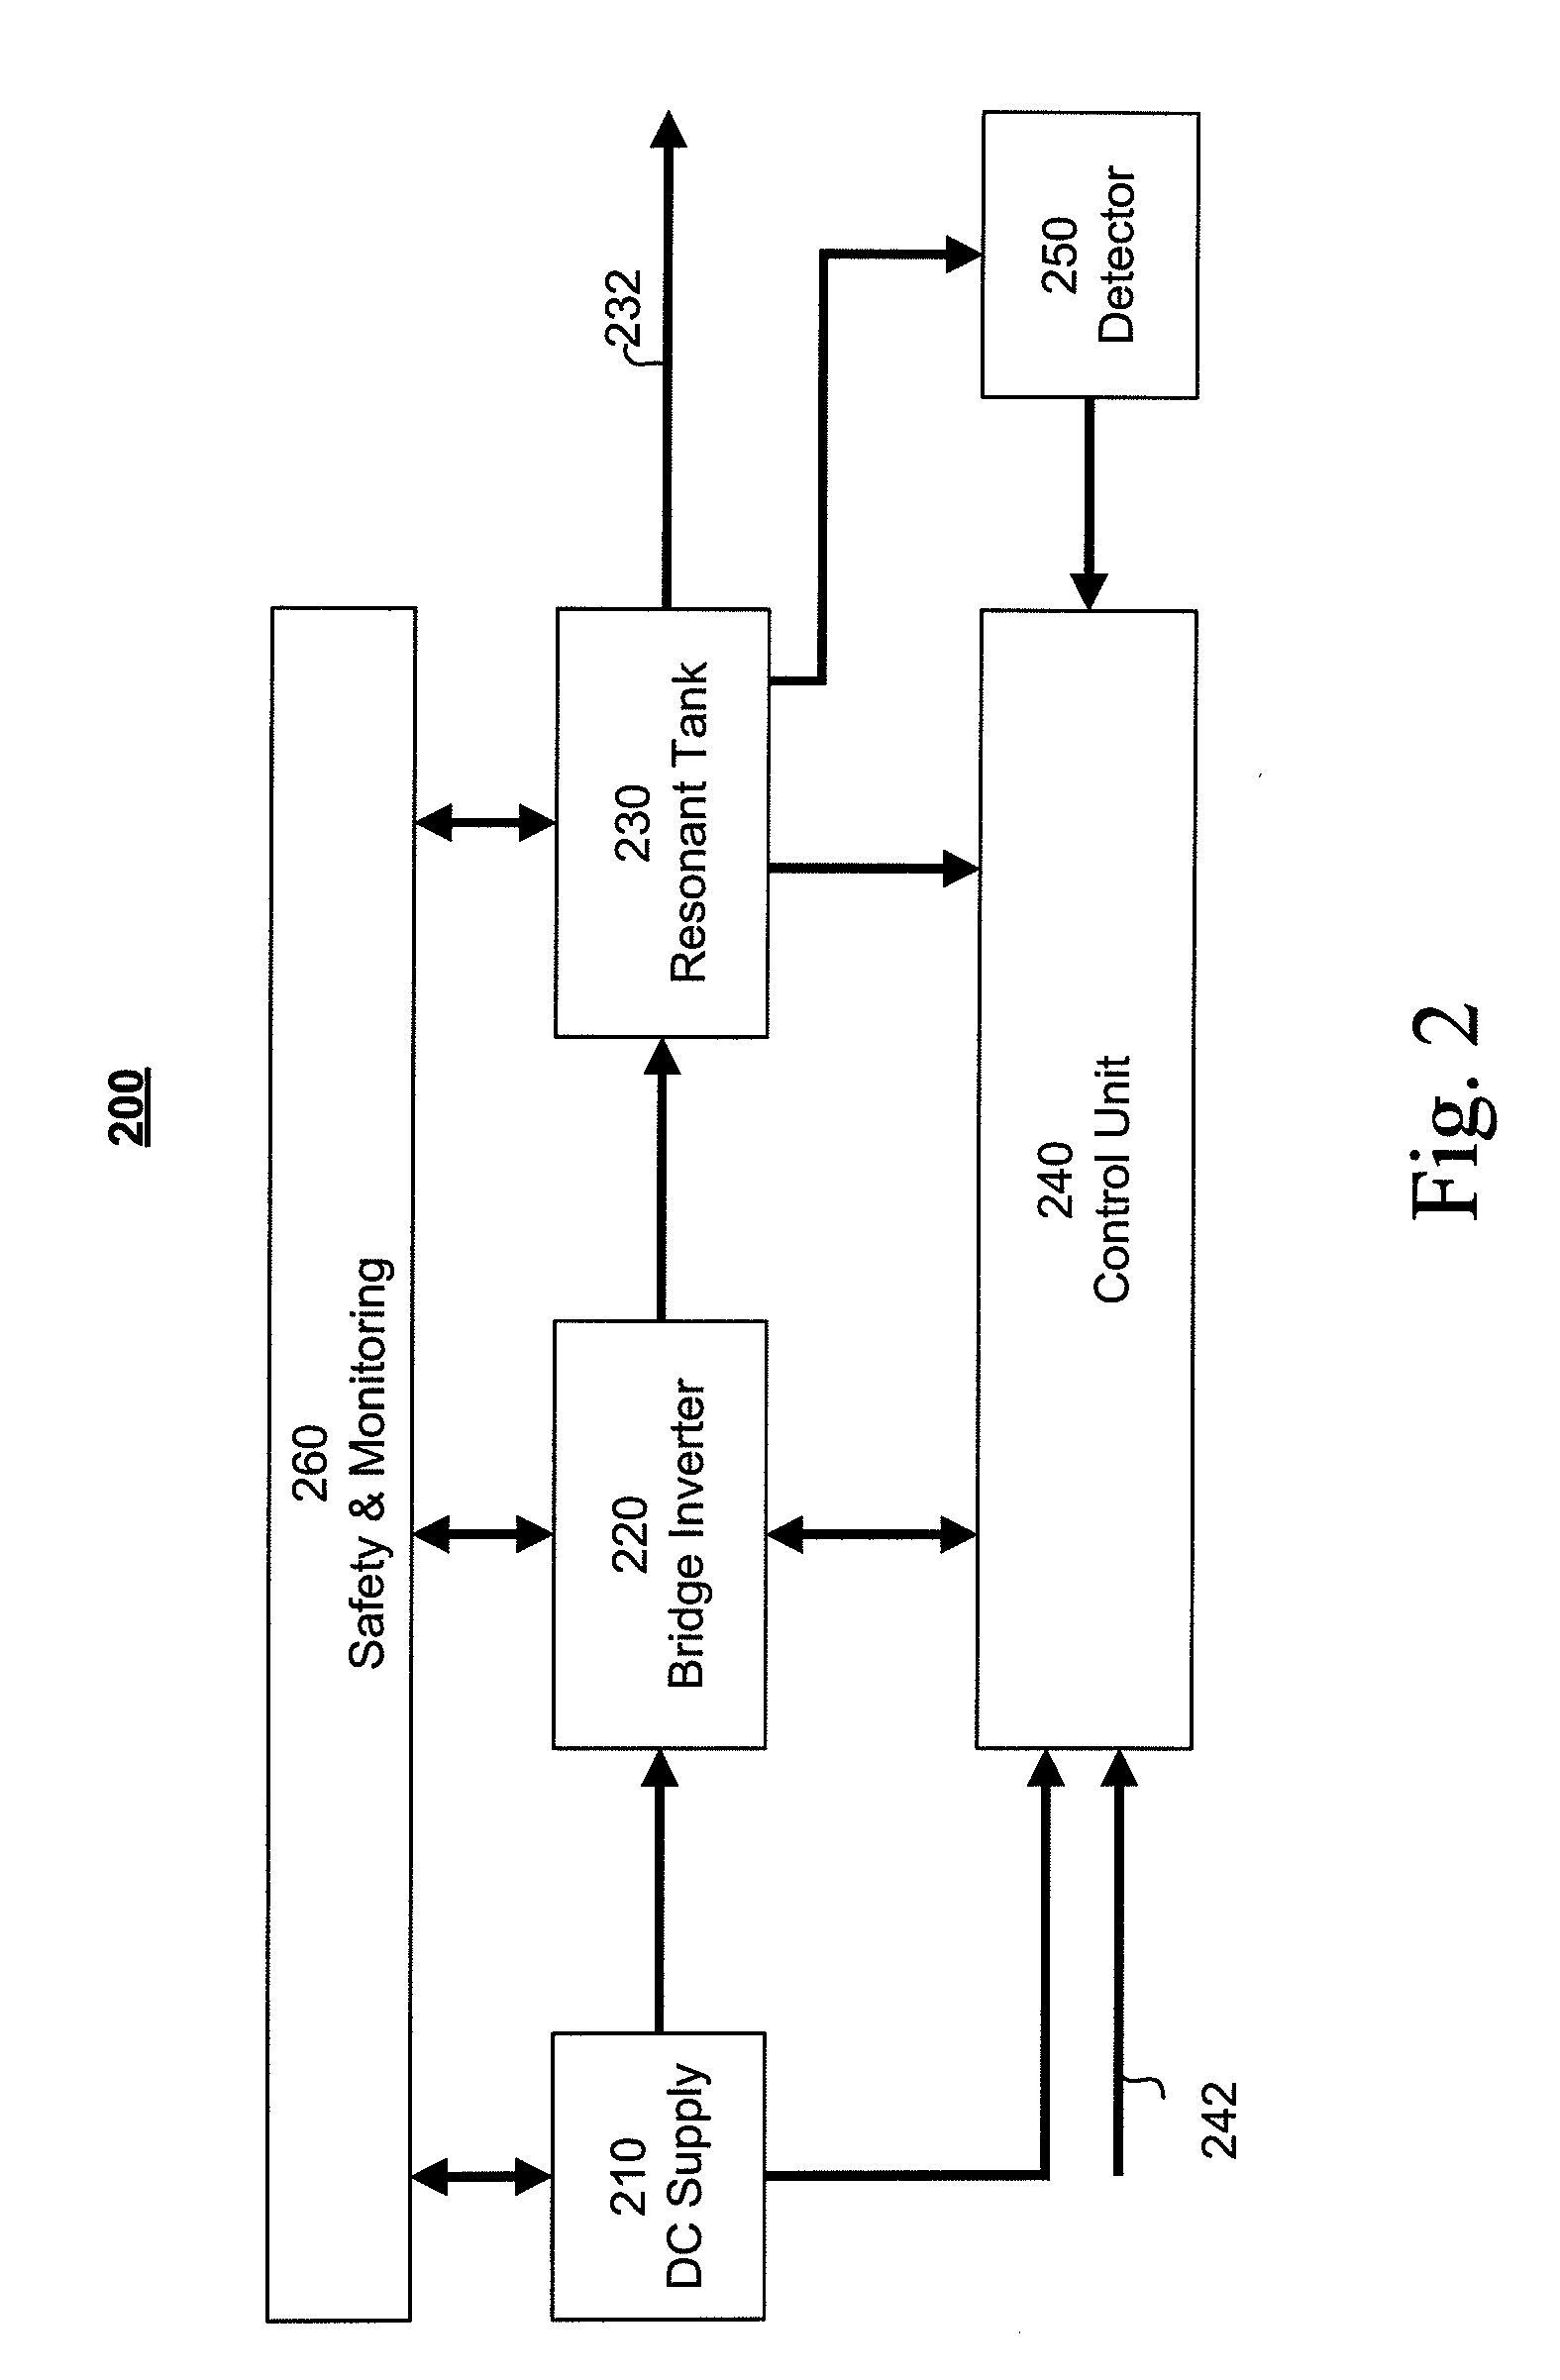 Method and Apparatus of Providing Power to Ignite and Sustain a Plasma in a Reactive Gas Generator